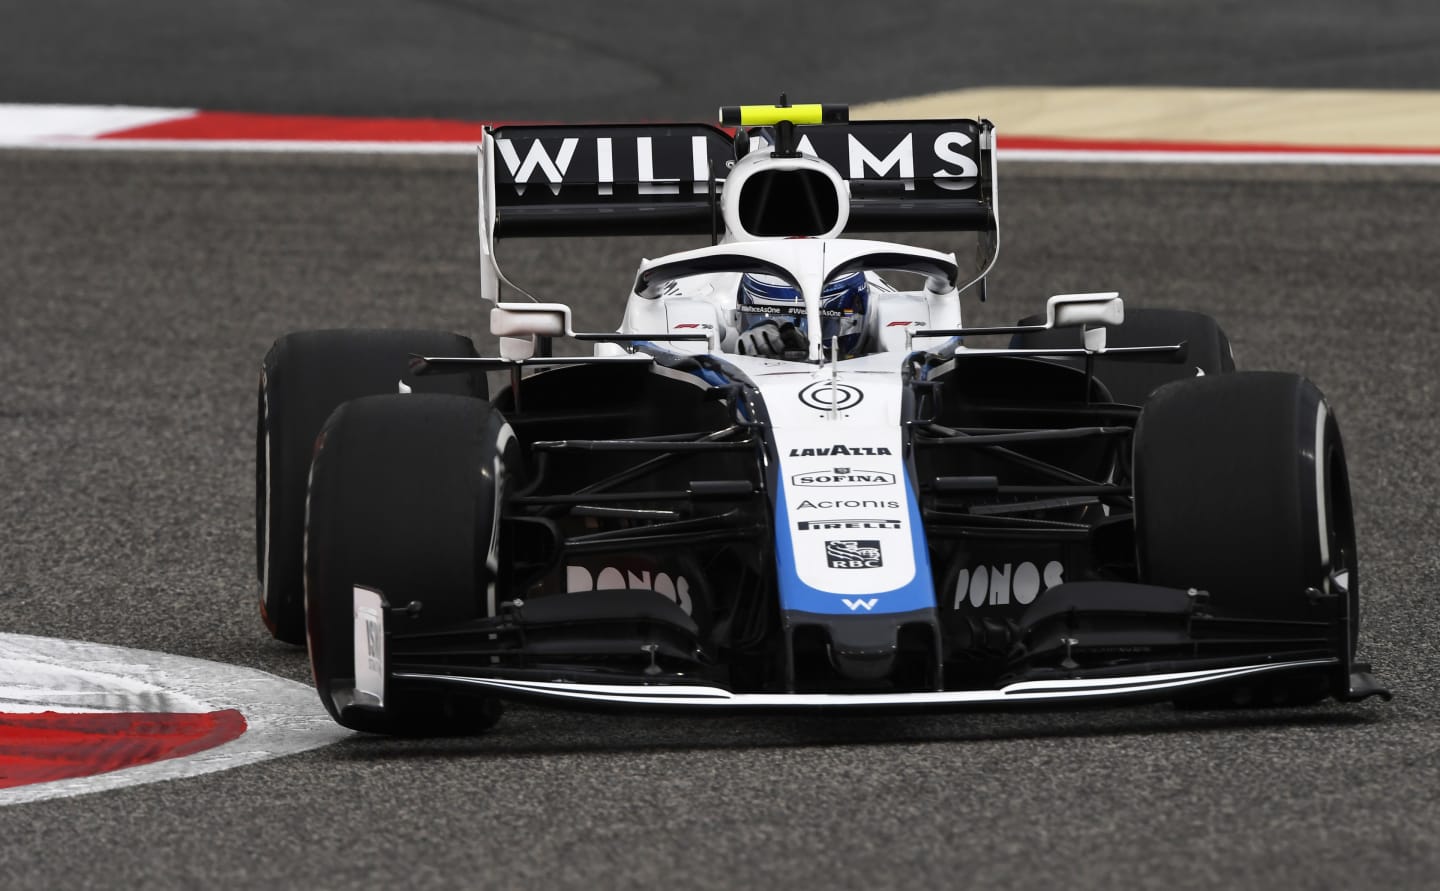 BAHRAIN, BAHRAIN - NOVEMBER 27: Nicholas Latifi of Canada driving the (6) Williams Racing FW43 Mercedes on track during practice ahead of the F1 Grand Prix of Bahrain at Bahrain International Circuit on November 27, 2020 in Bahrain, Bahrain. (Photo by Rudy Carezzevoli/Getty Images)